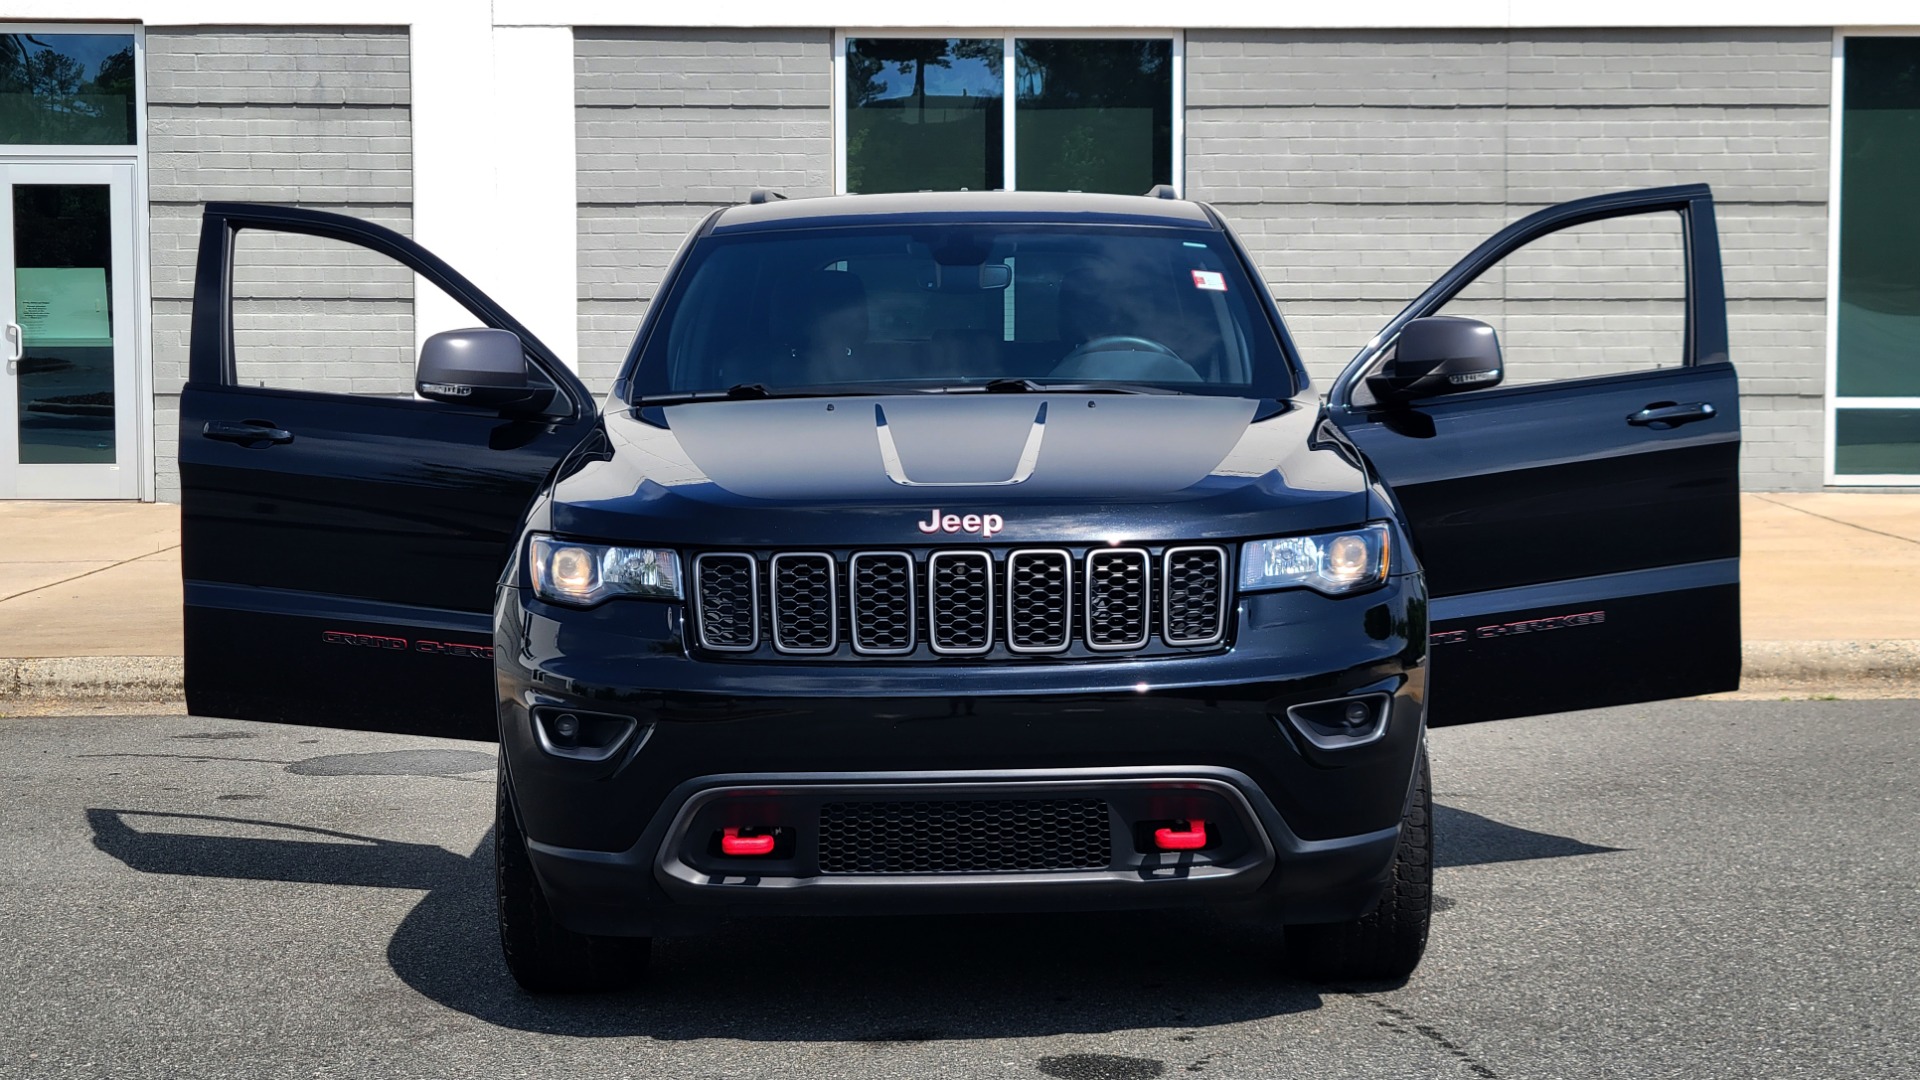 Used 2018 Jeep GRAND CHEROKEE TRAILHAWK 4X4 / 3.6L / NAV / BLIND SPOT / REARVIEW for sale $38,000 at Formula Imports in Charlotte NC 28227 29